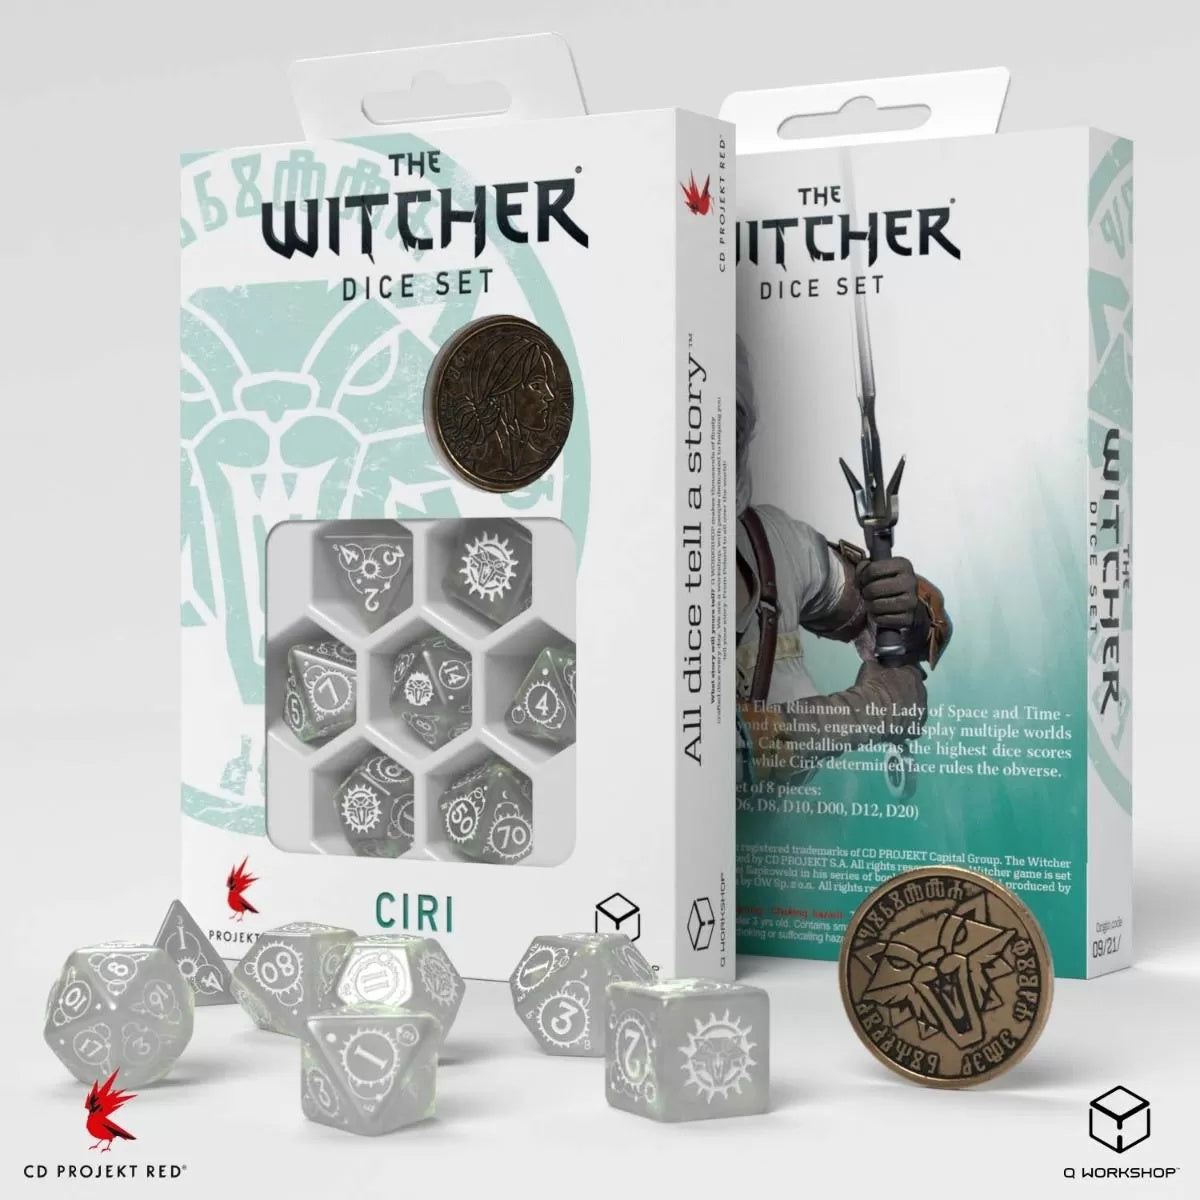 Q Workshop - The Witcher Dice Set Ciri - The Lady of Space and Time